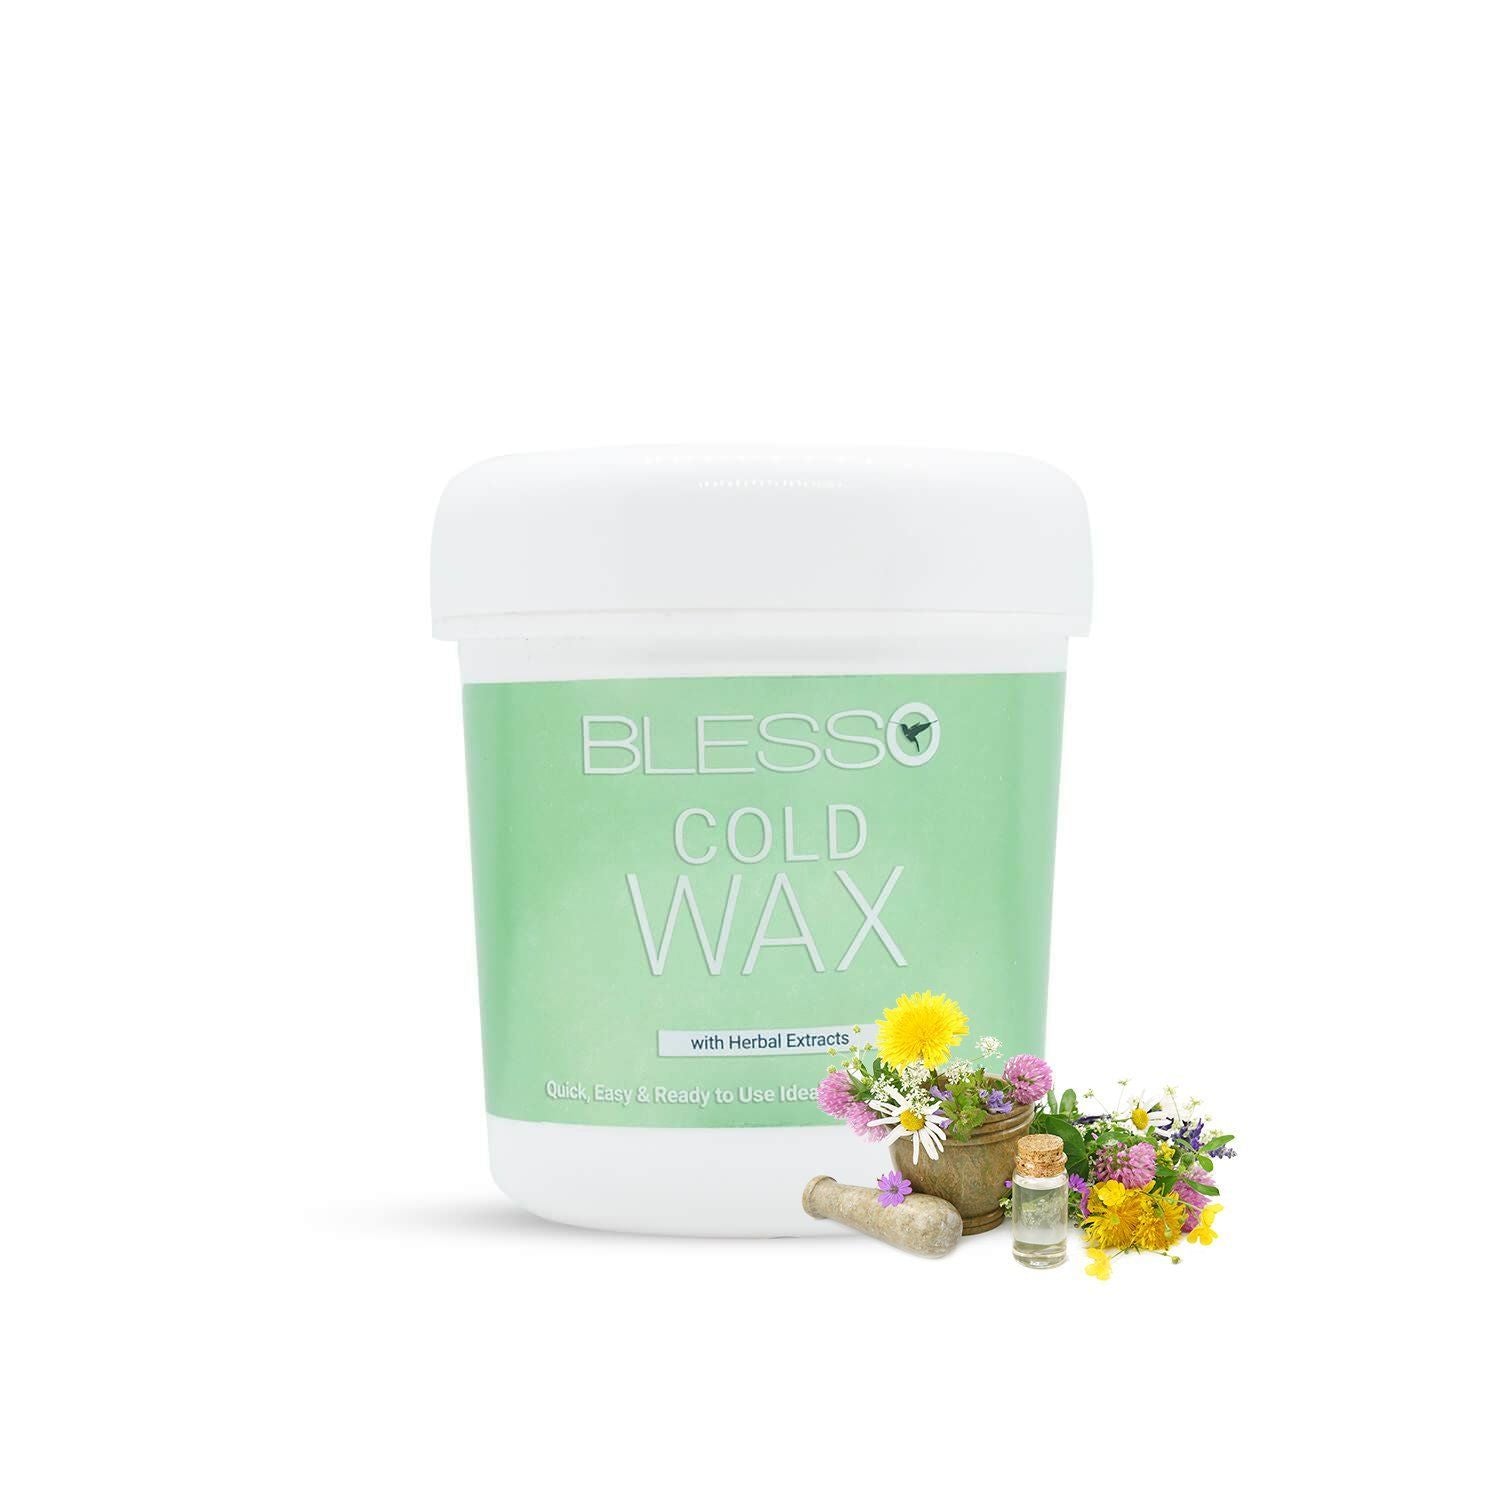 Blesso Cold Wax with Herbal Extracts - Blesso Cosmetics